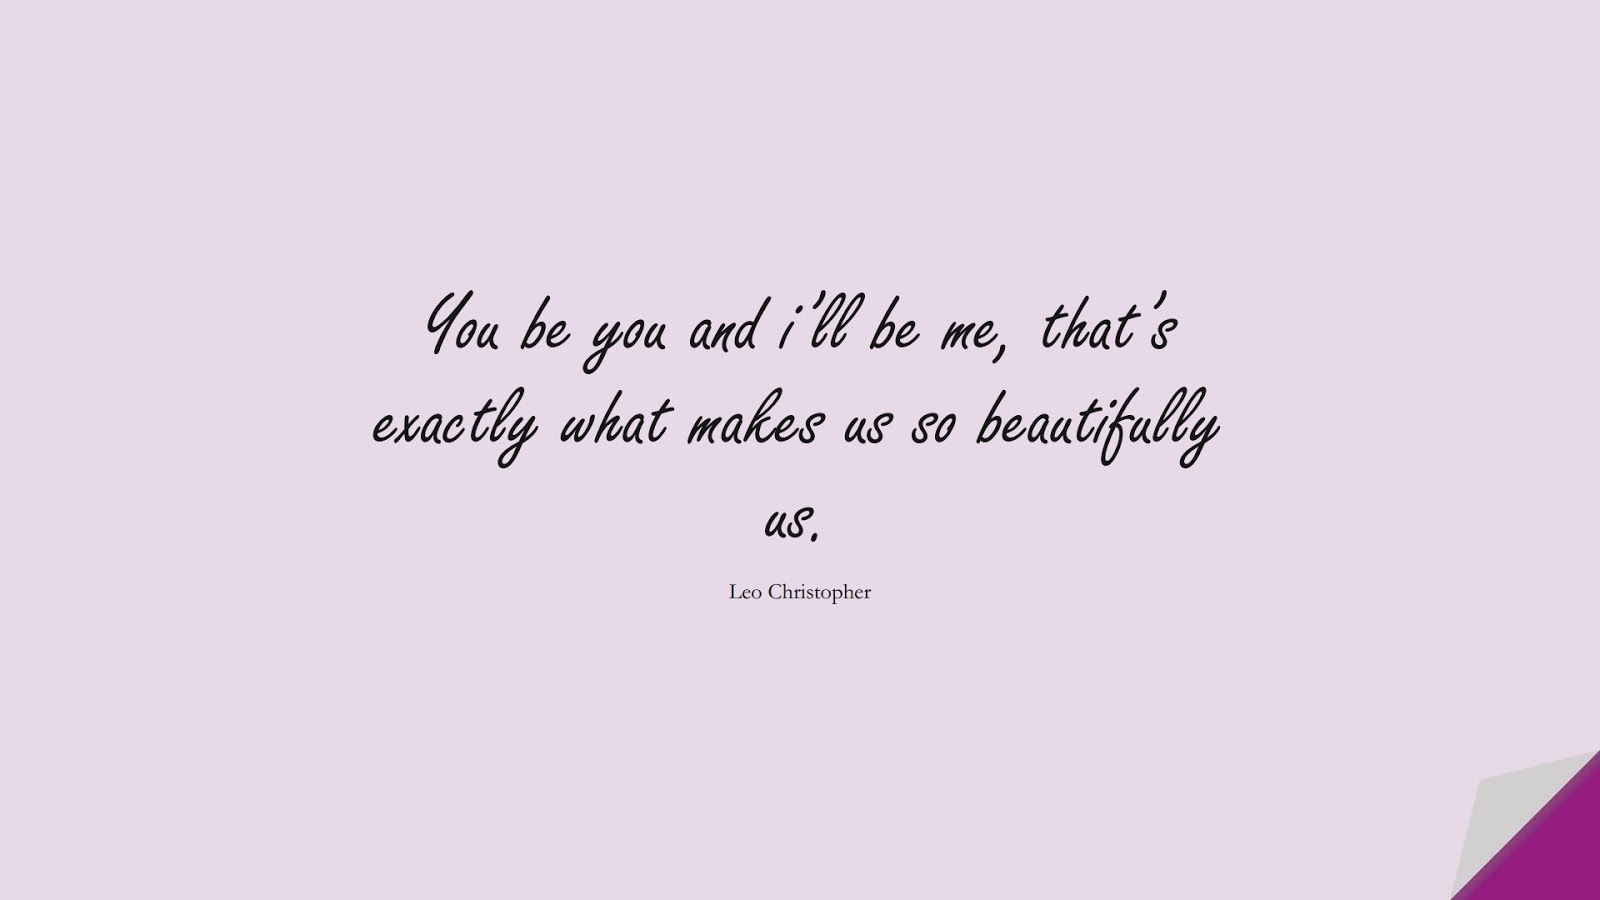 You be you and i’ll be me, that’s exactly what makes us so beautifully us. (Leo Christopher);  #LoveQuotes